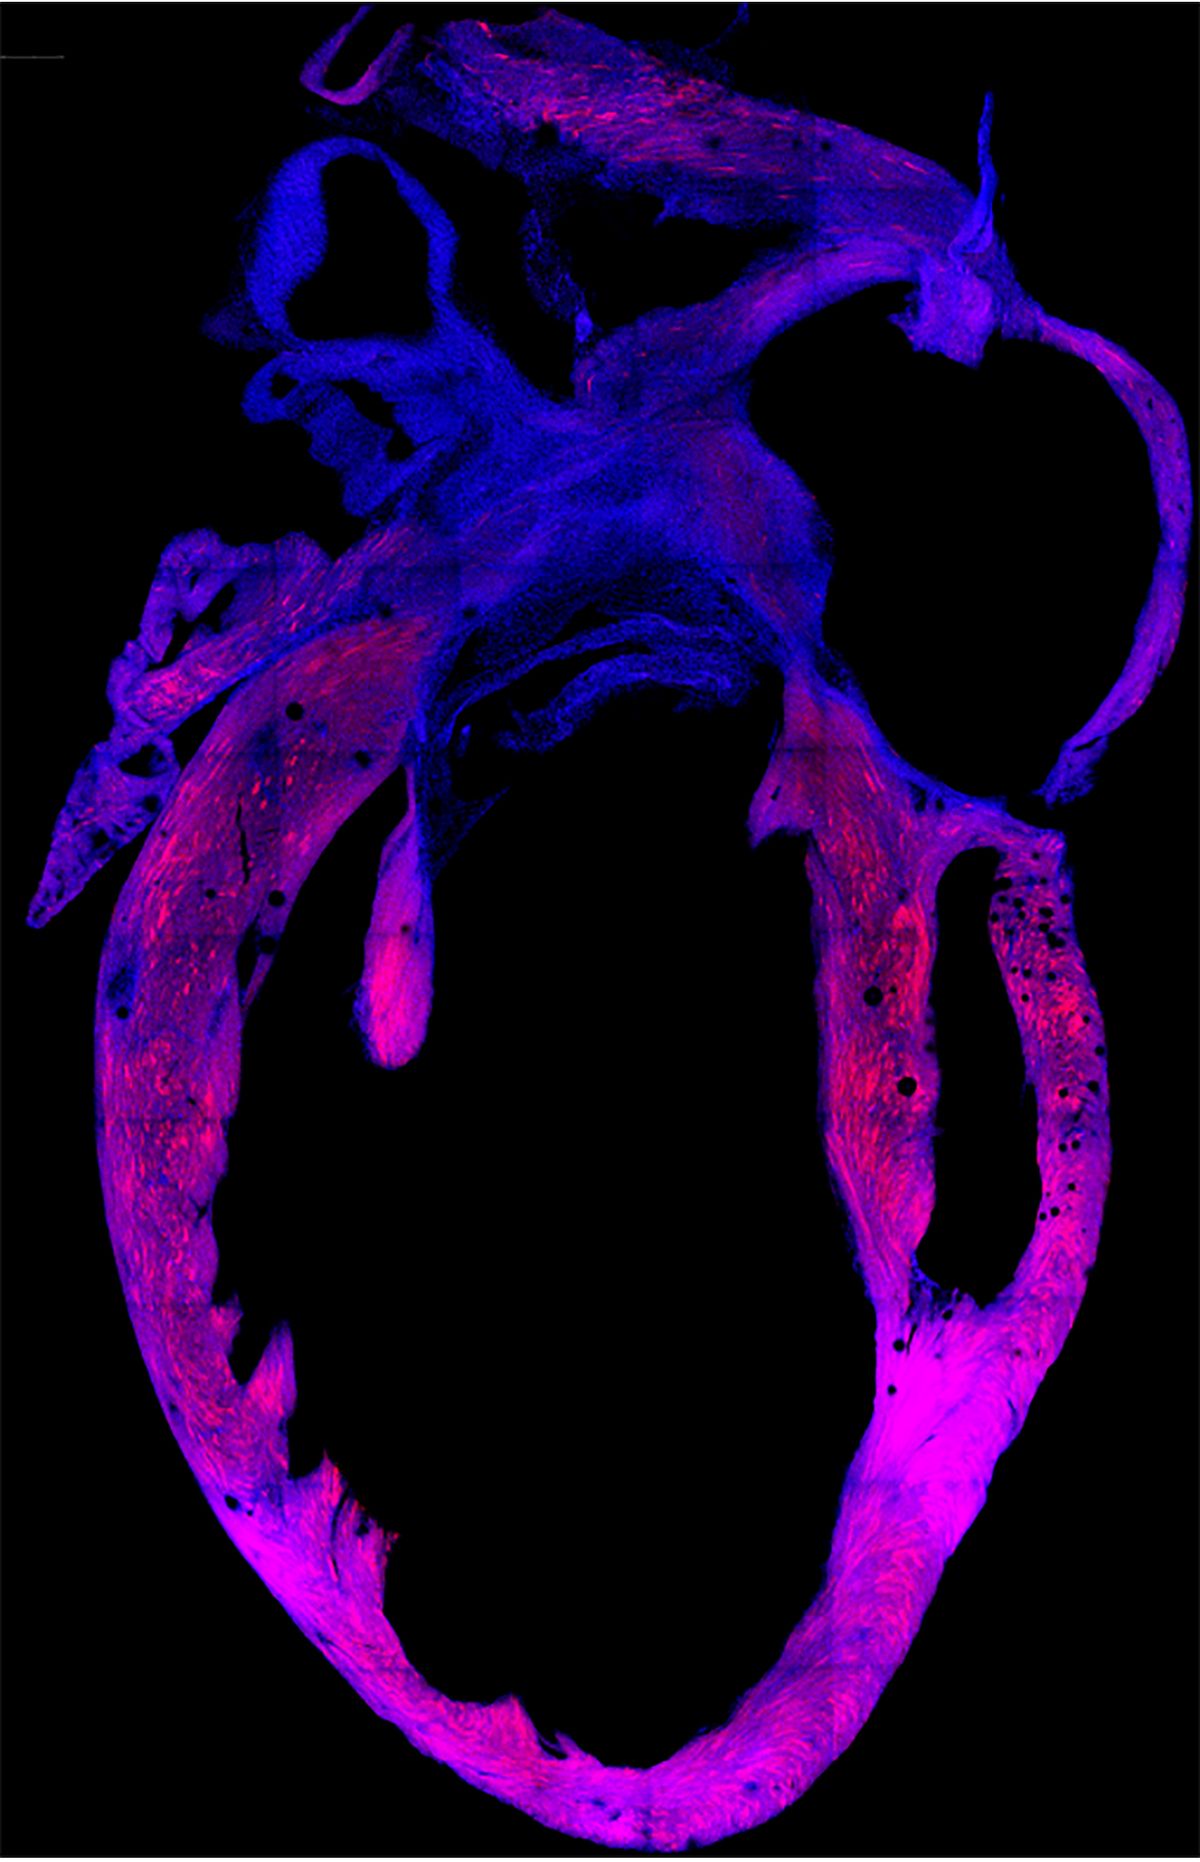 Purple and blue fluorescent image of heart